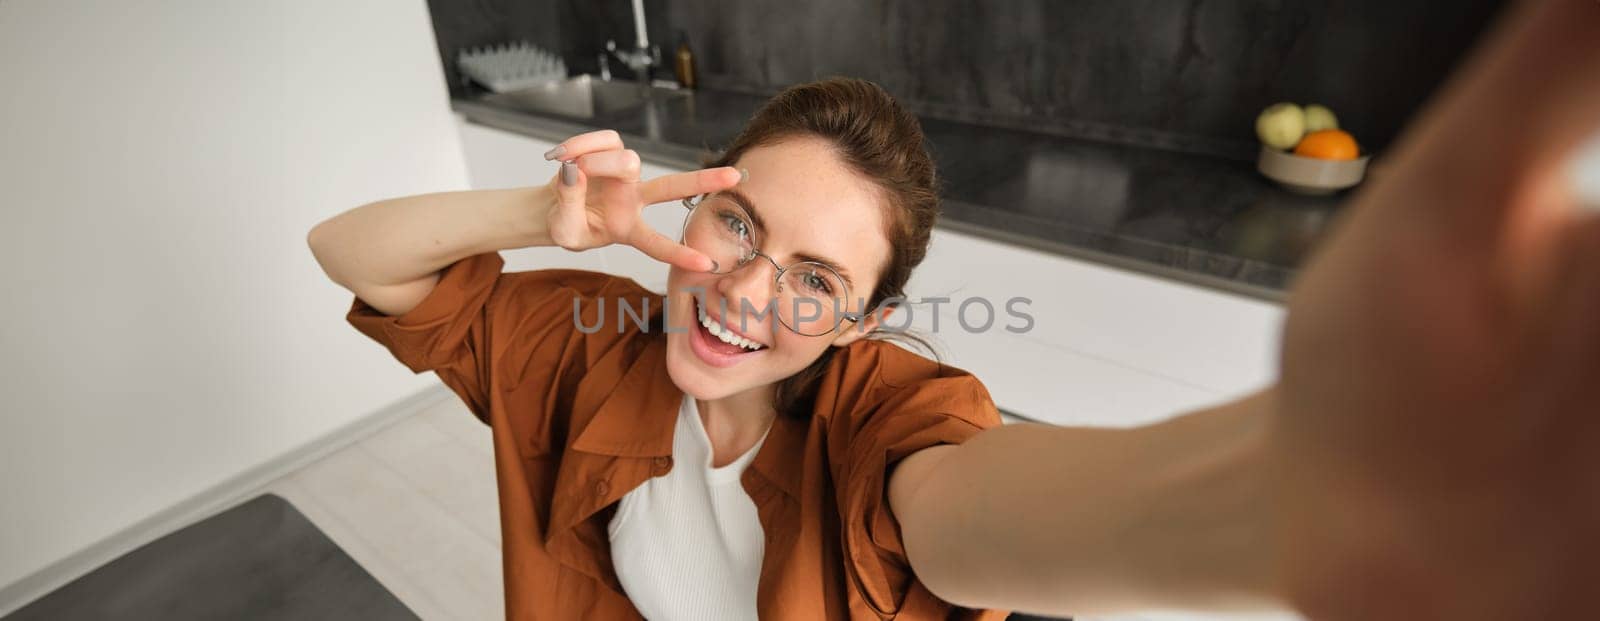 Selfie of happy young and carefree woman, taking photo on mobile phone with extended hand, posing and smiling, sitting in kitchen in glasses.